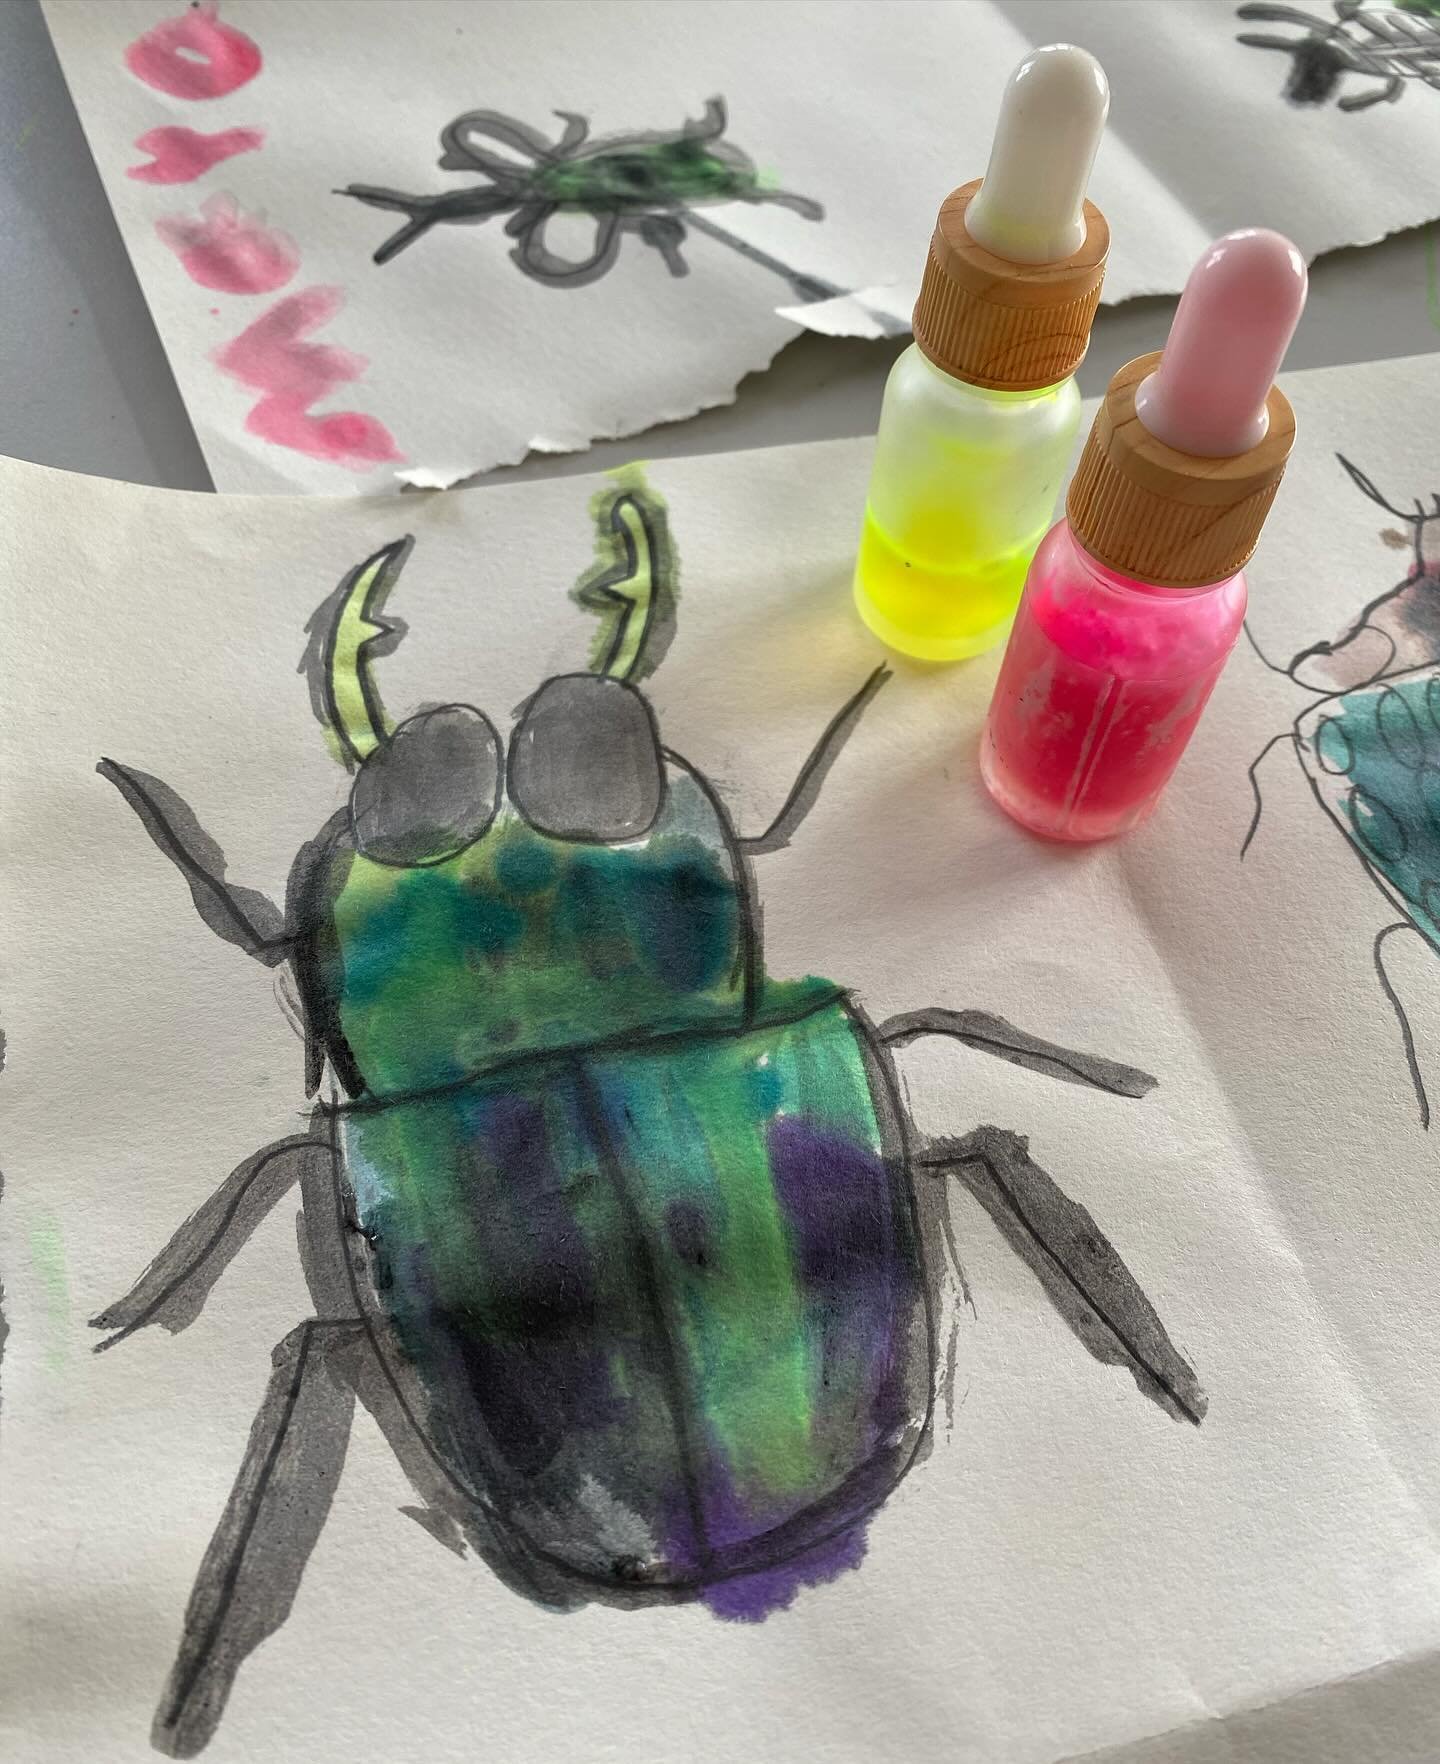 We started our summer term clubs this week with a BEETLE BUG BANG 💥 it is spring after all 😜 &hellip;I also introduced three new classes to the wonder and mindful hypnosis of reclaimed pen ink. Nothing but empty bottles have come home with me  toda